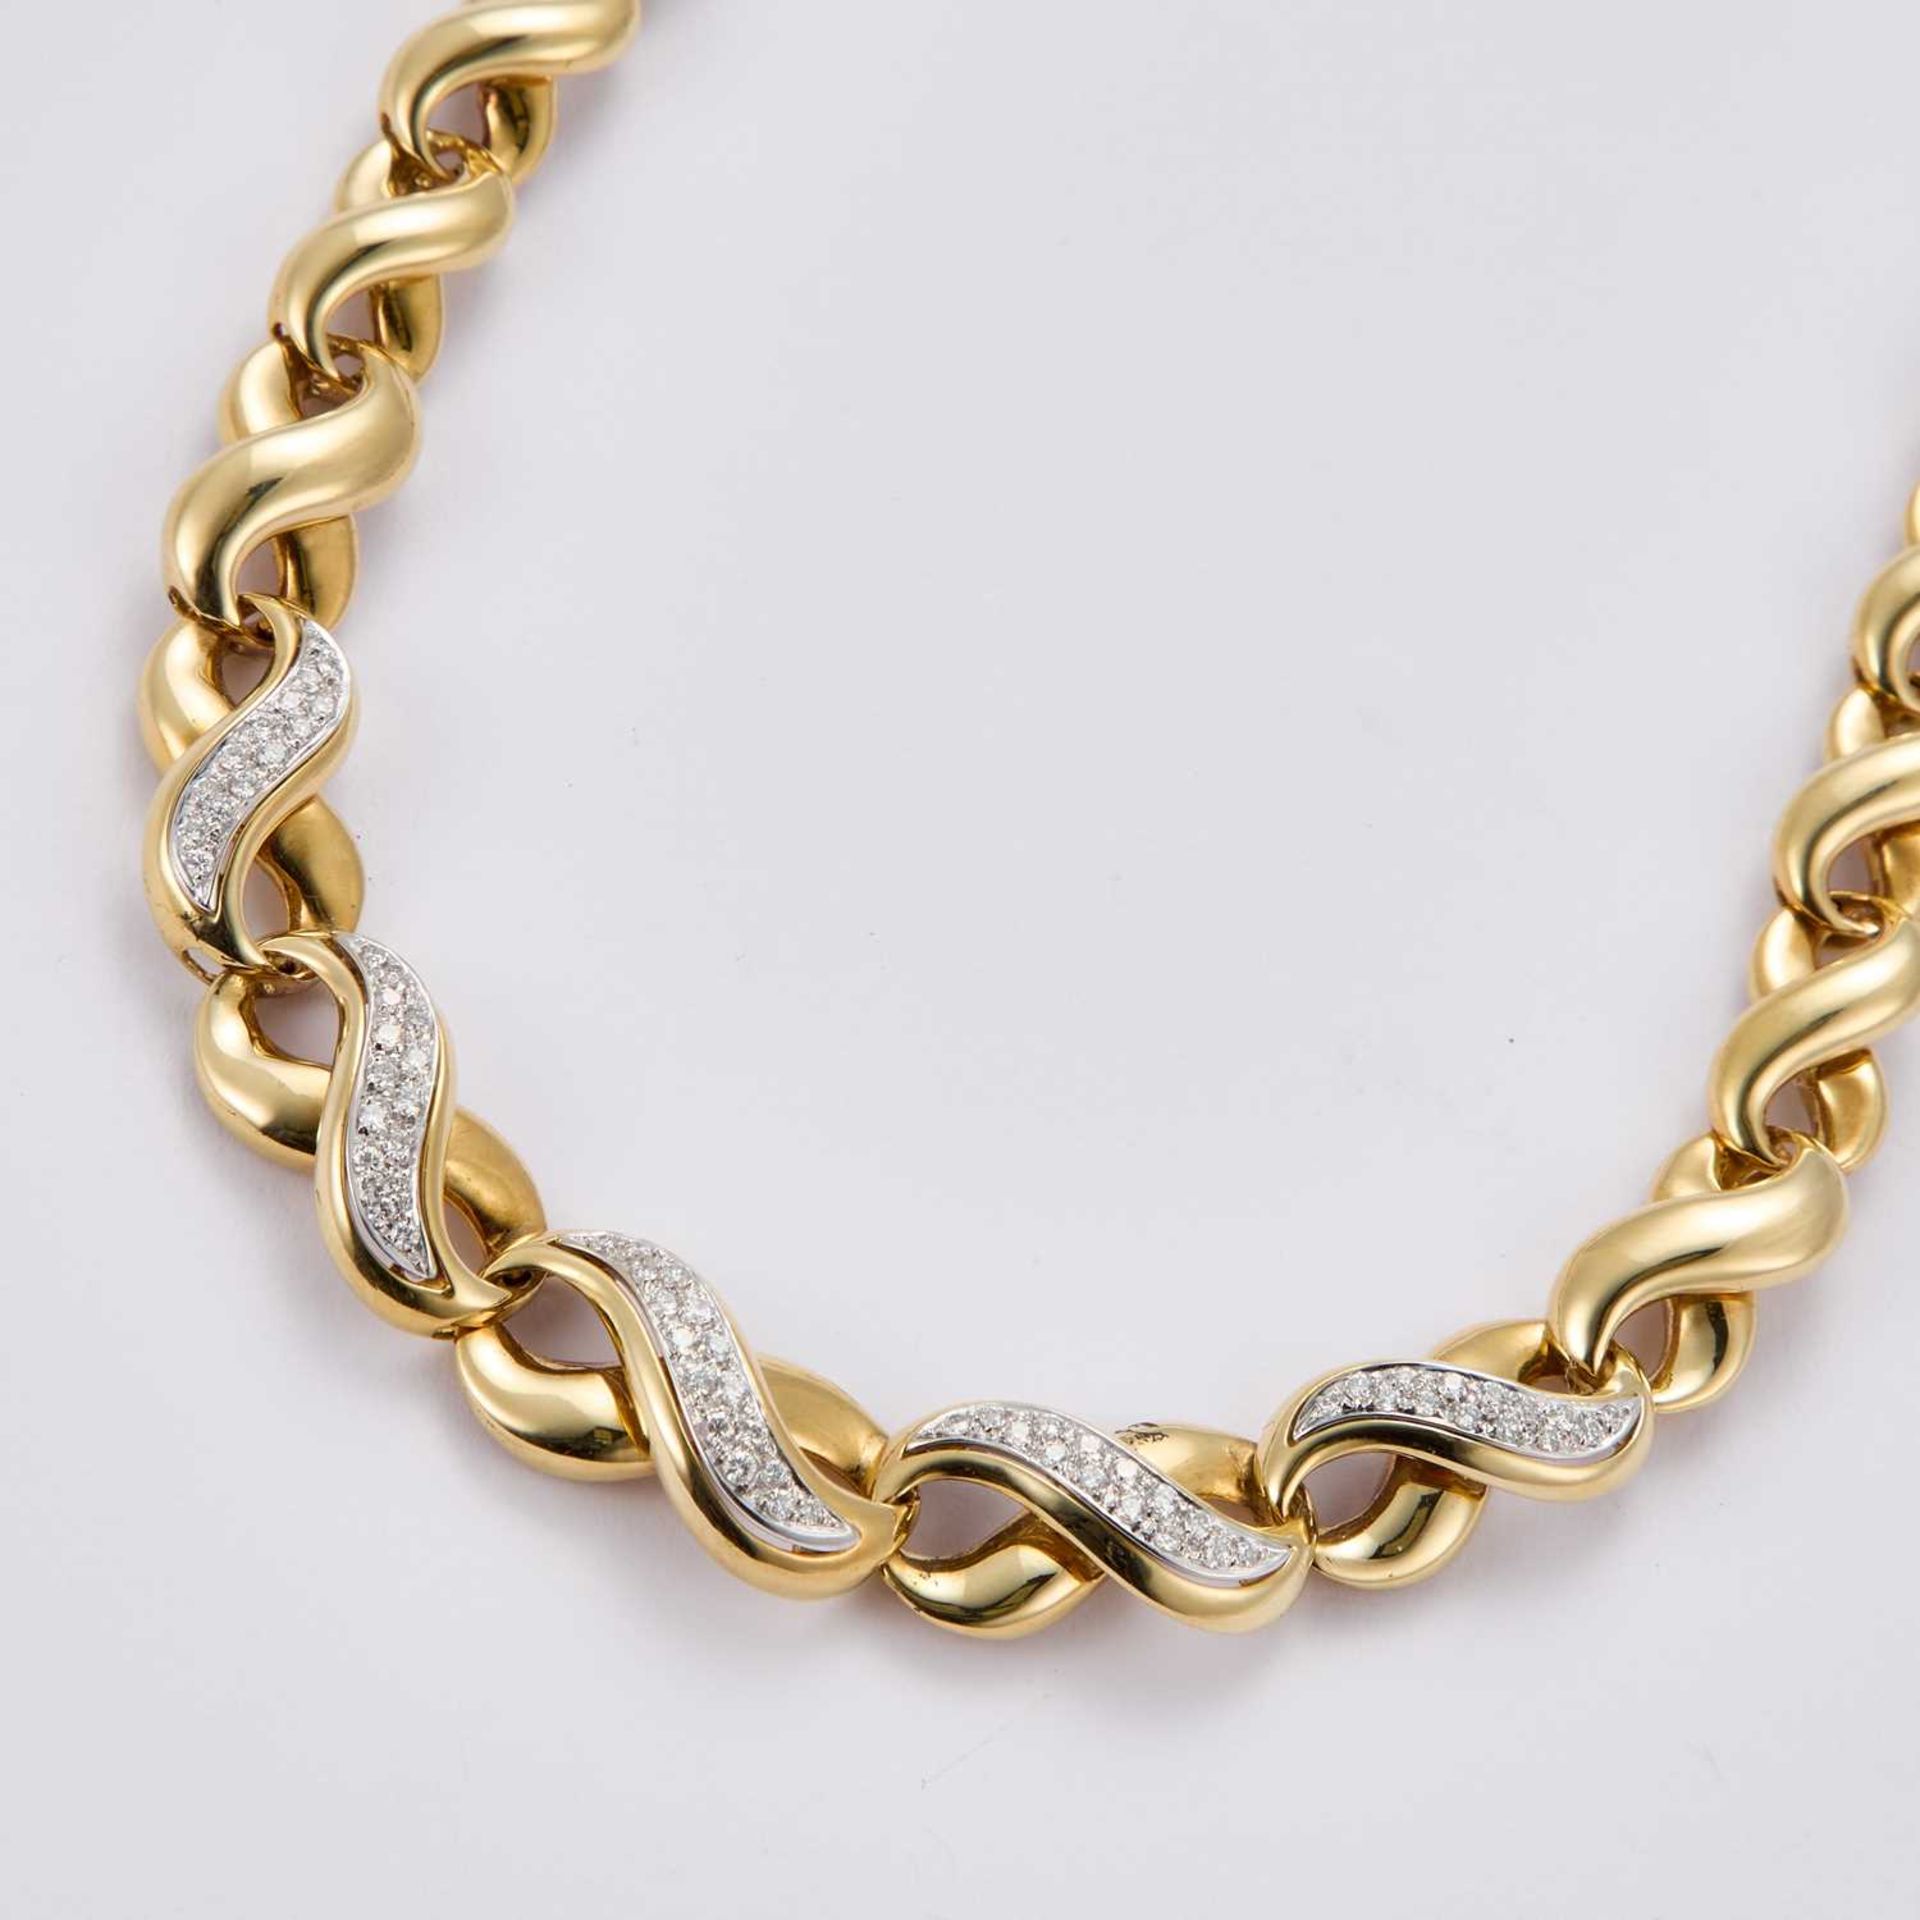 AN 18 CARAT GOLD AND DIAMOND NECKLACE - Image 2 of 2